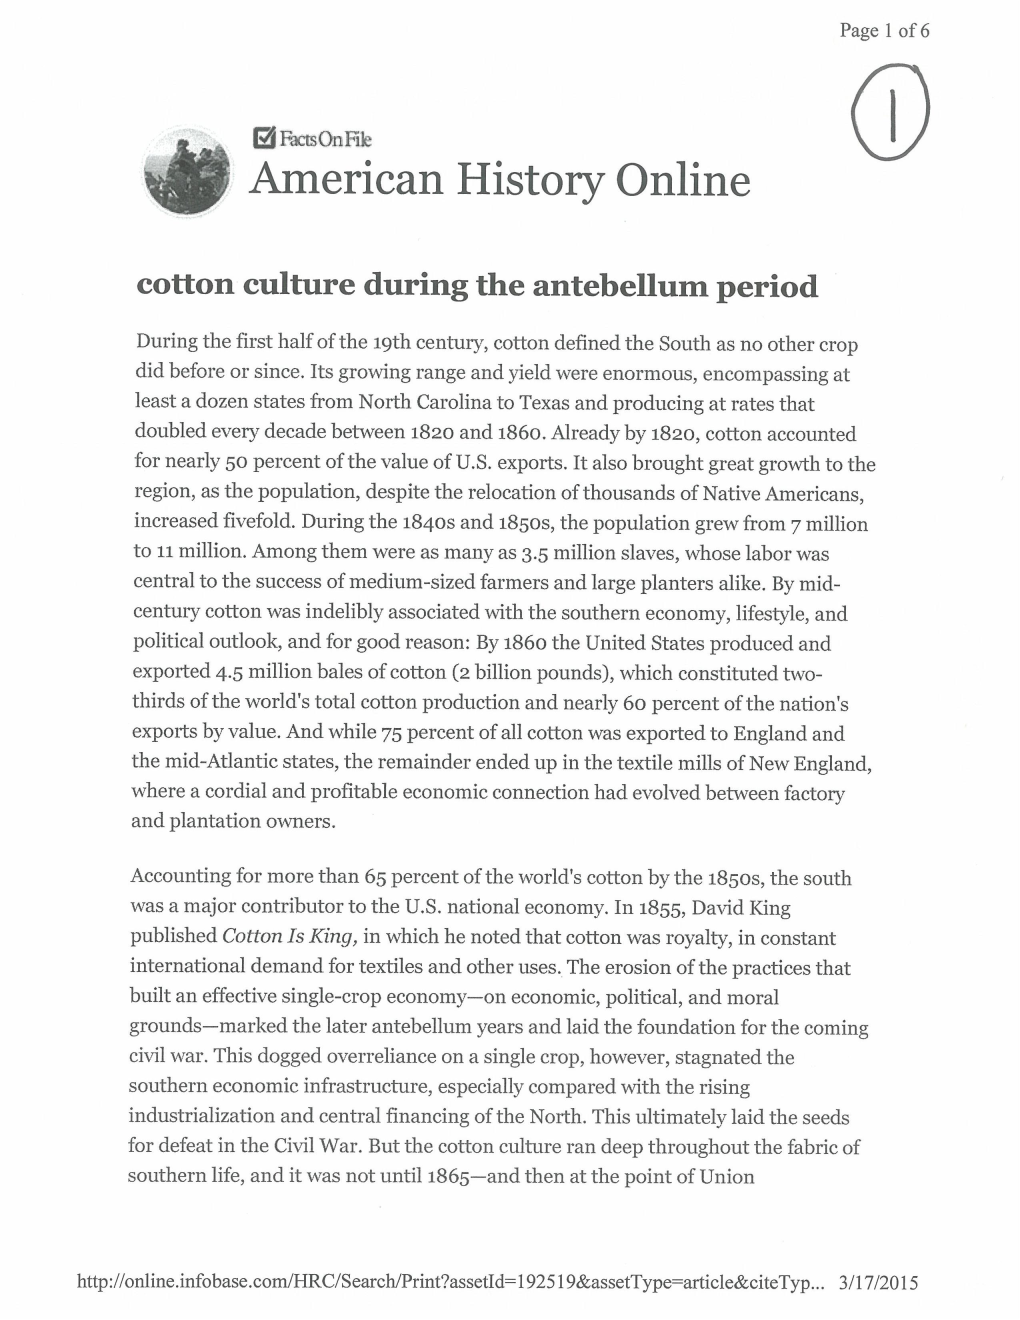 American History Online Cotton Culture During the Antebellum Period